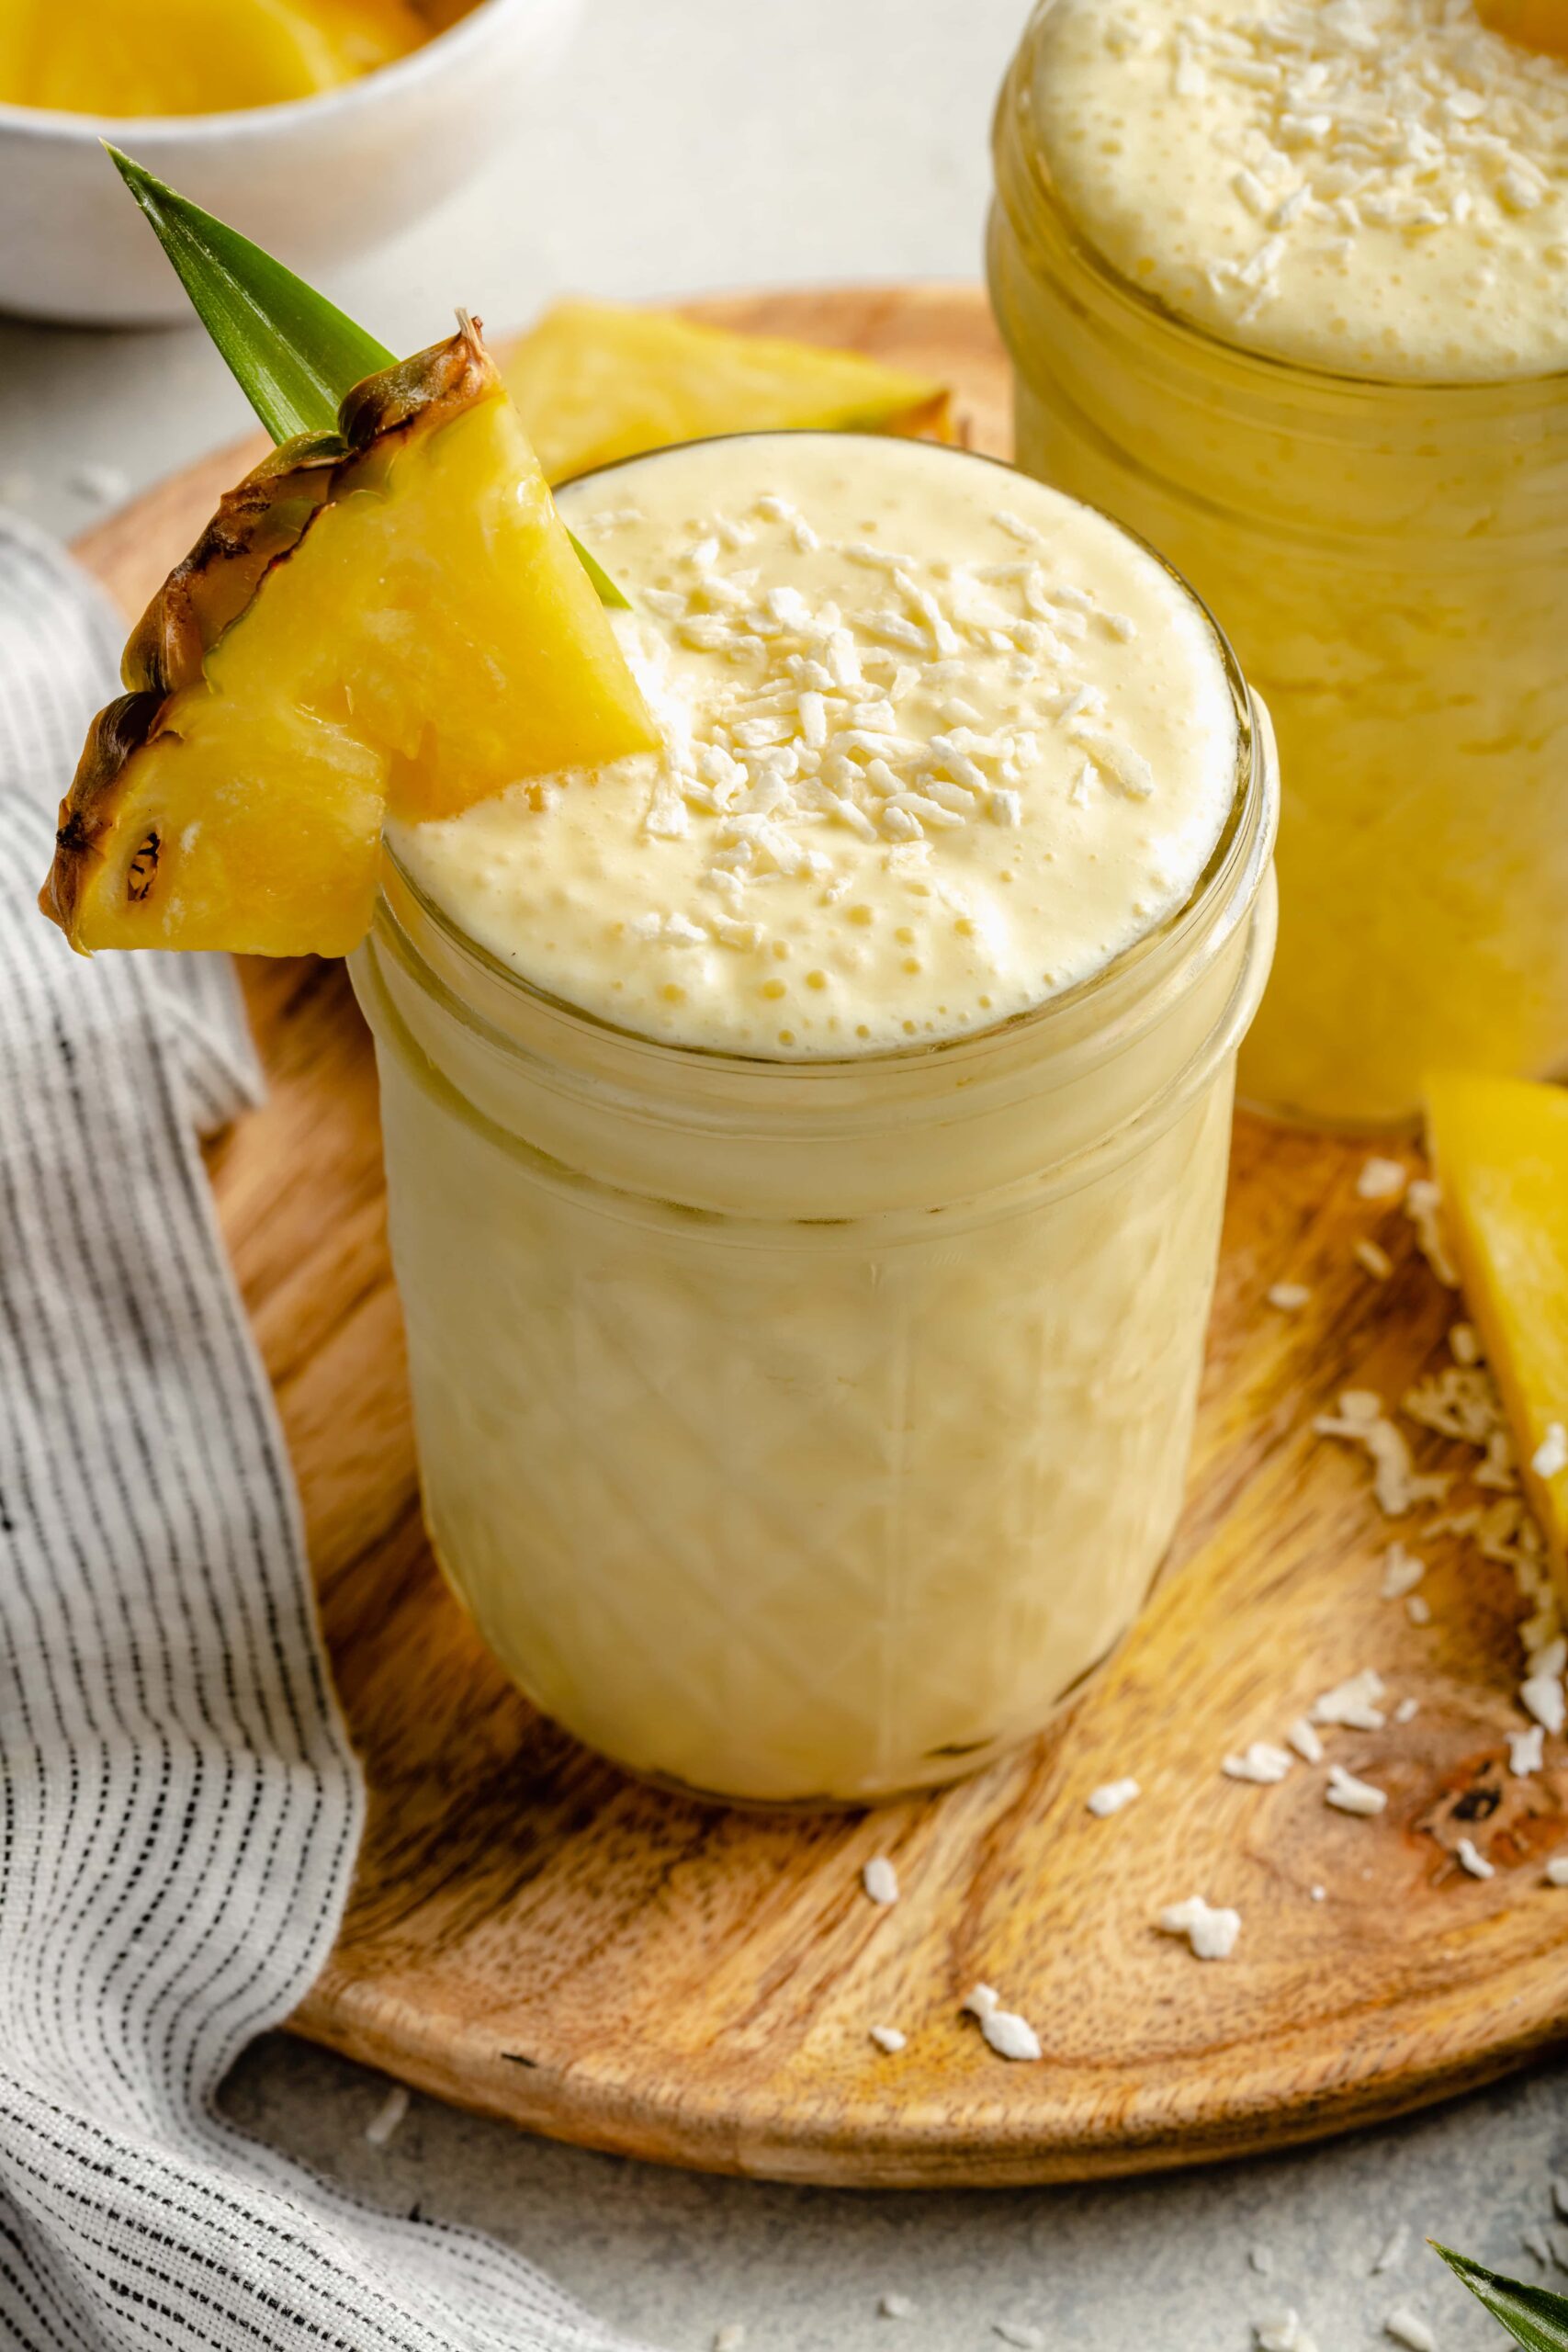 https://allthehealthythings.com/wp-content/uploads/2022/06/Pina-Colada-Smoothie-5-scaled.jpg